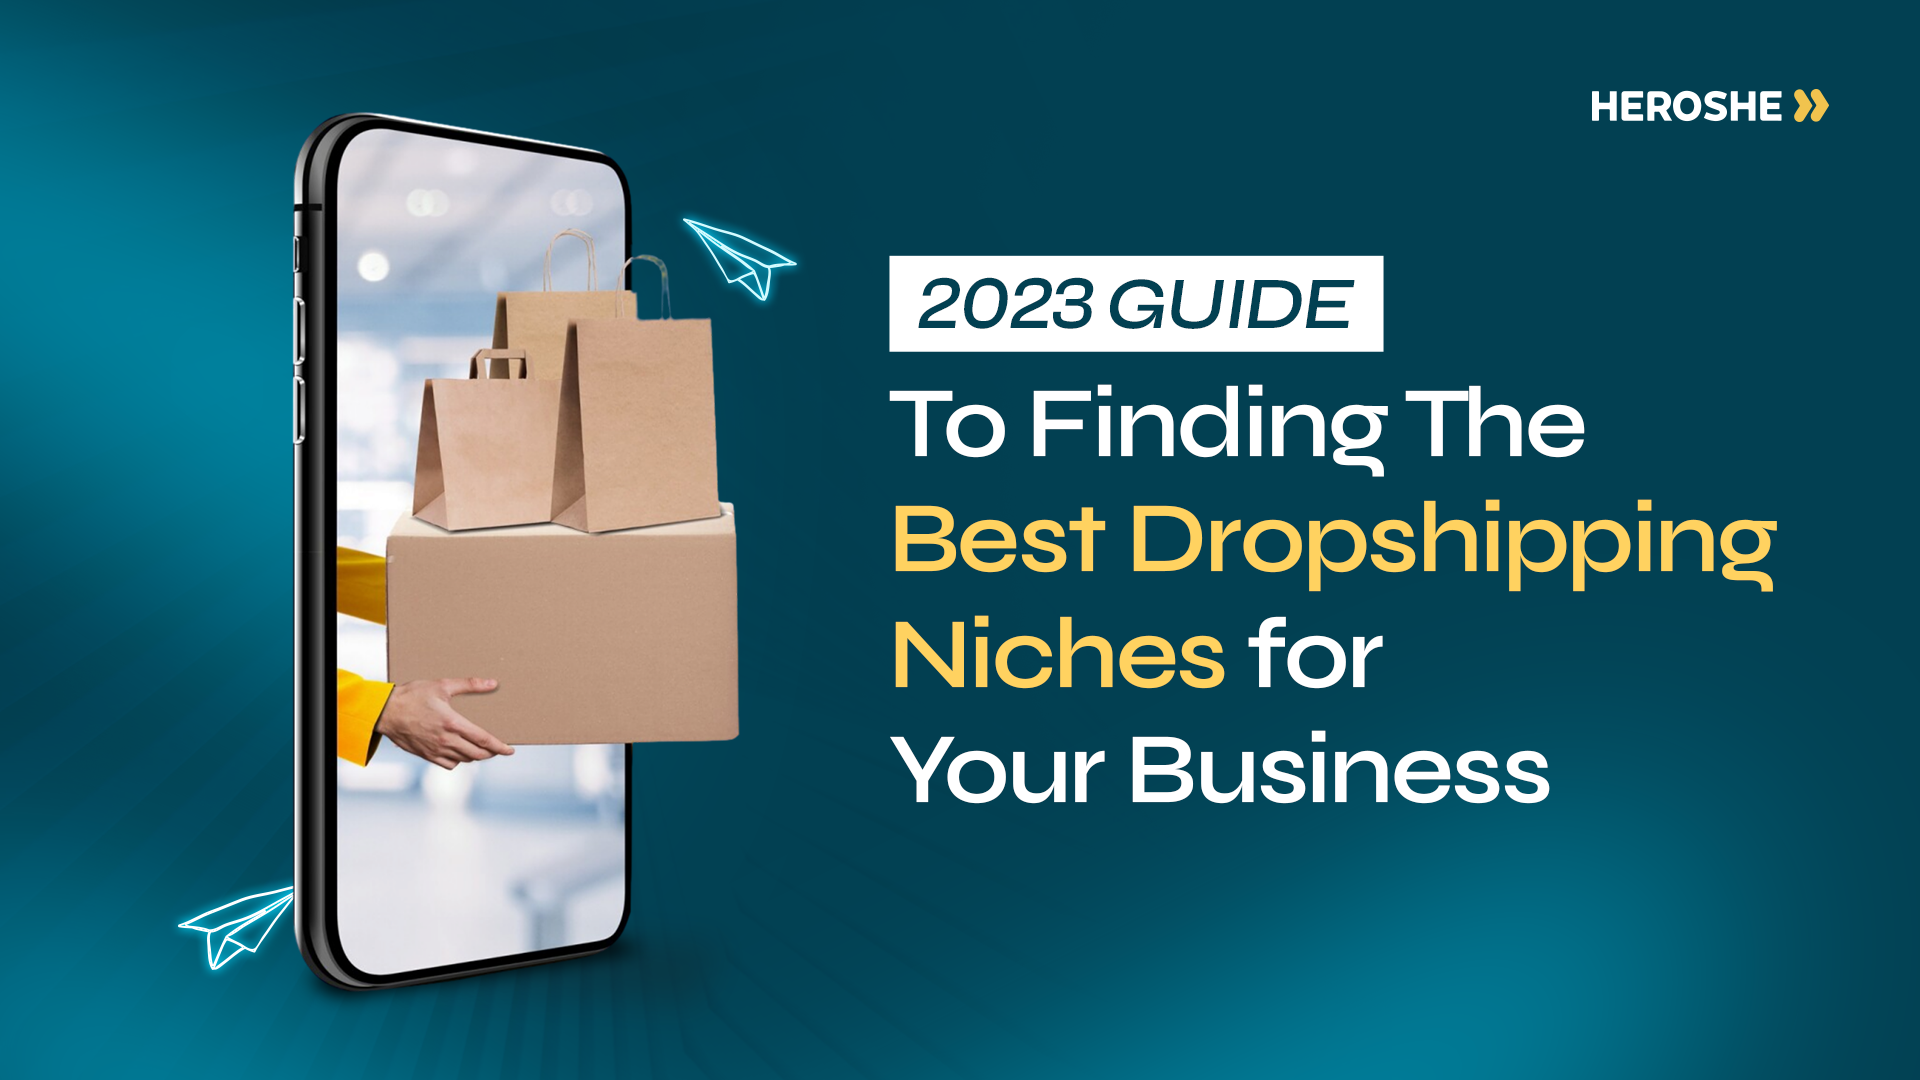 2023 Guide To Finding The Best Dropshipping Niches for Your Business